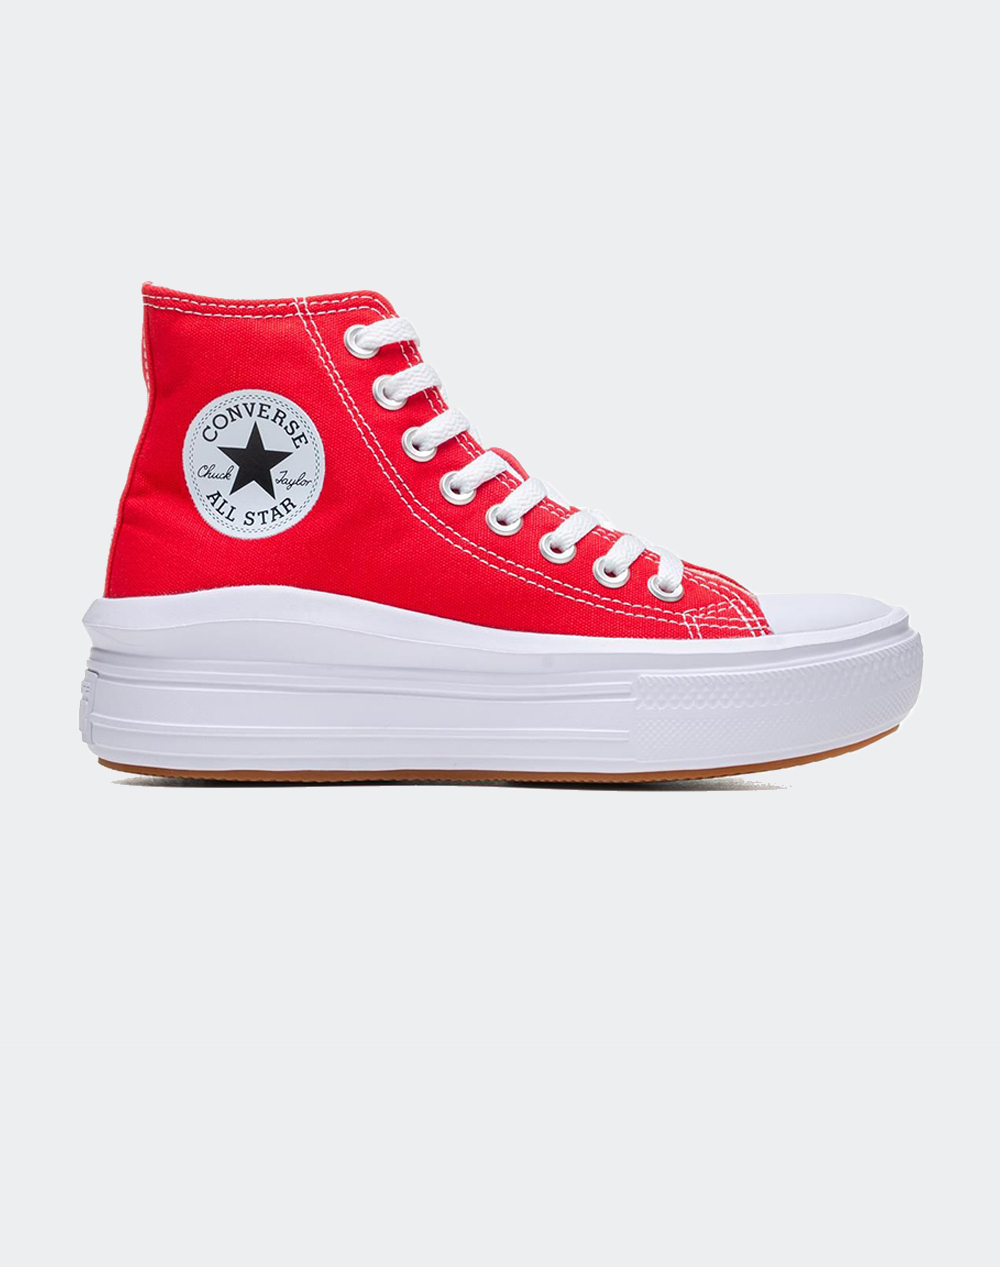 CONVERSE CHUCK TAYLOR ALL STAR MOVE A09073C-600 Red 3810ACONV6070057_XR27843